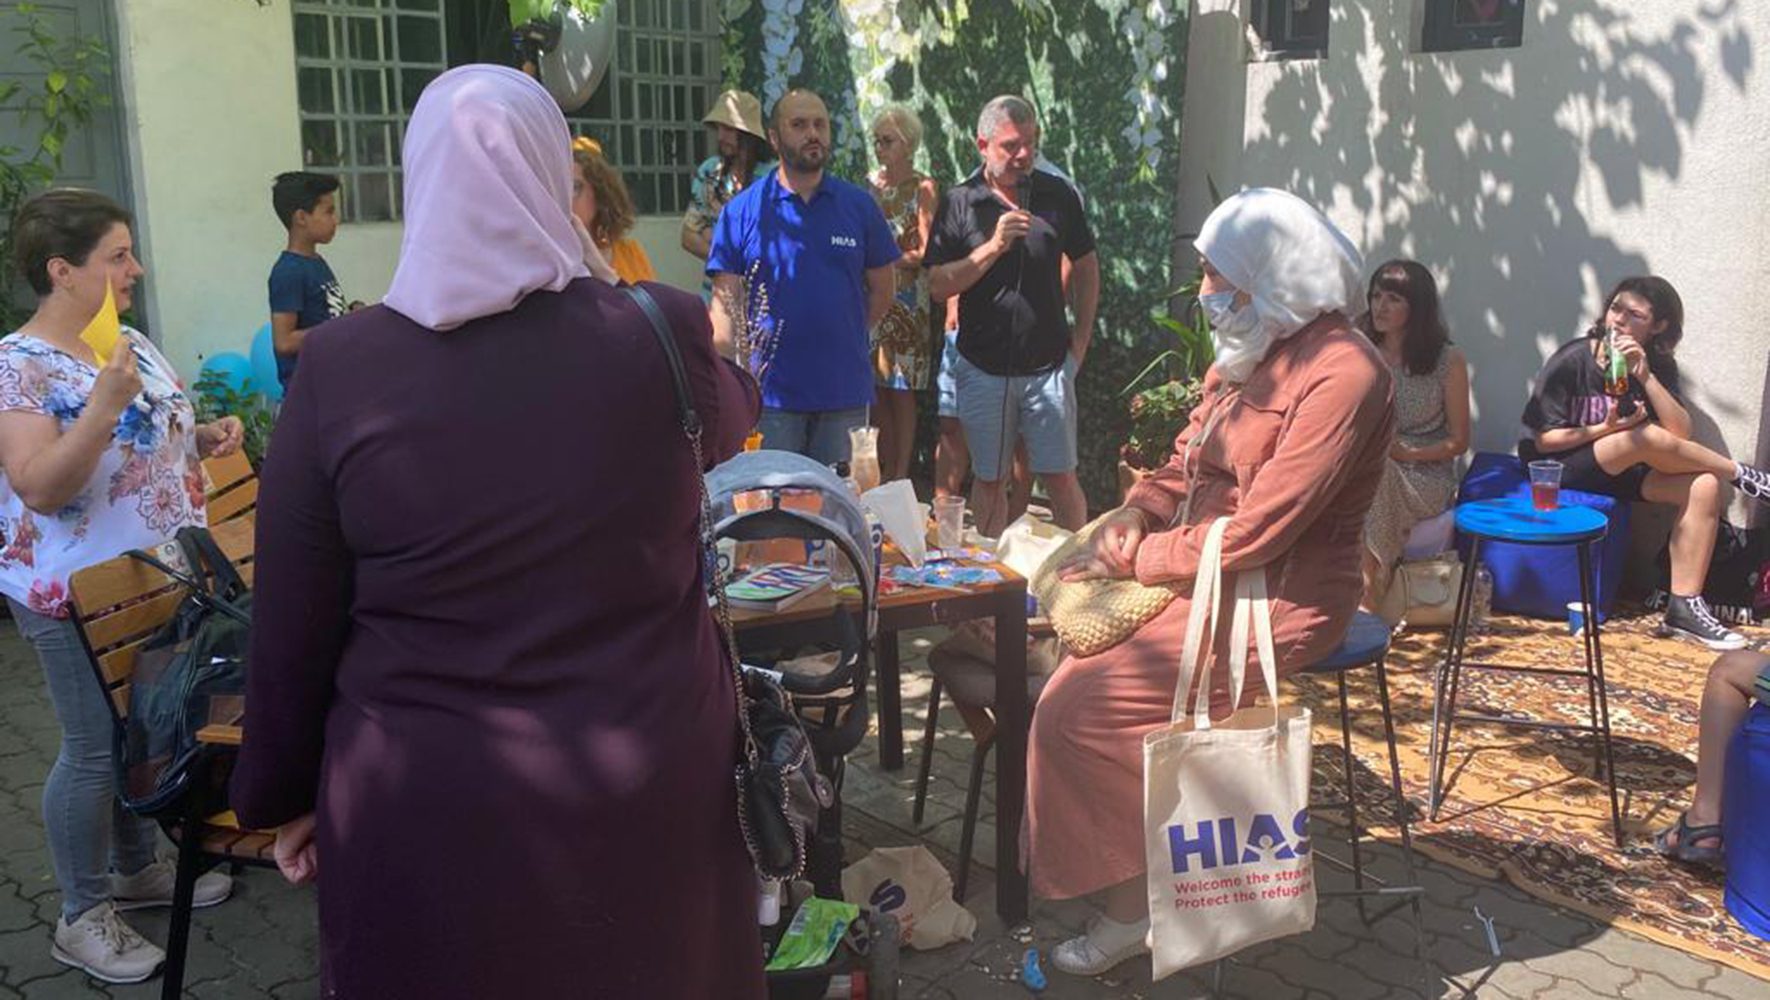 Outside a man talking on microphone, woman in headdress sitting with HIAS tote bag